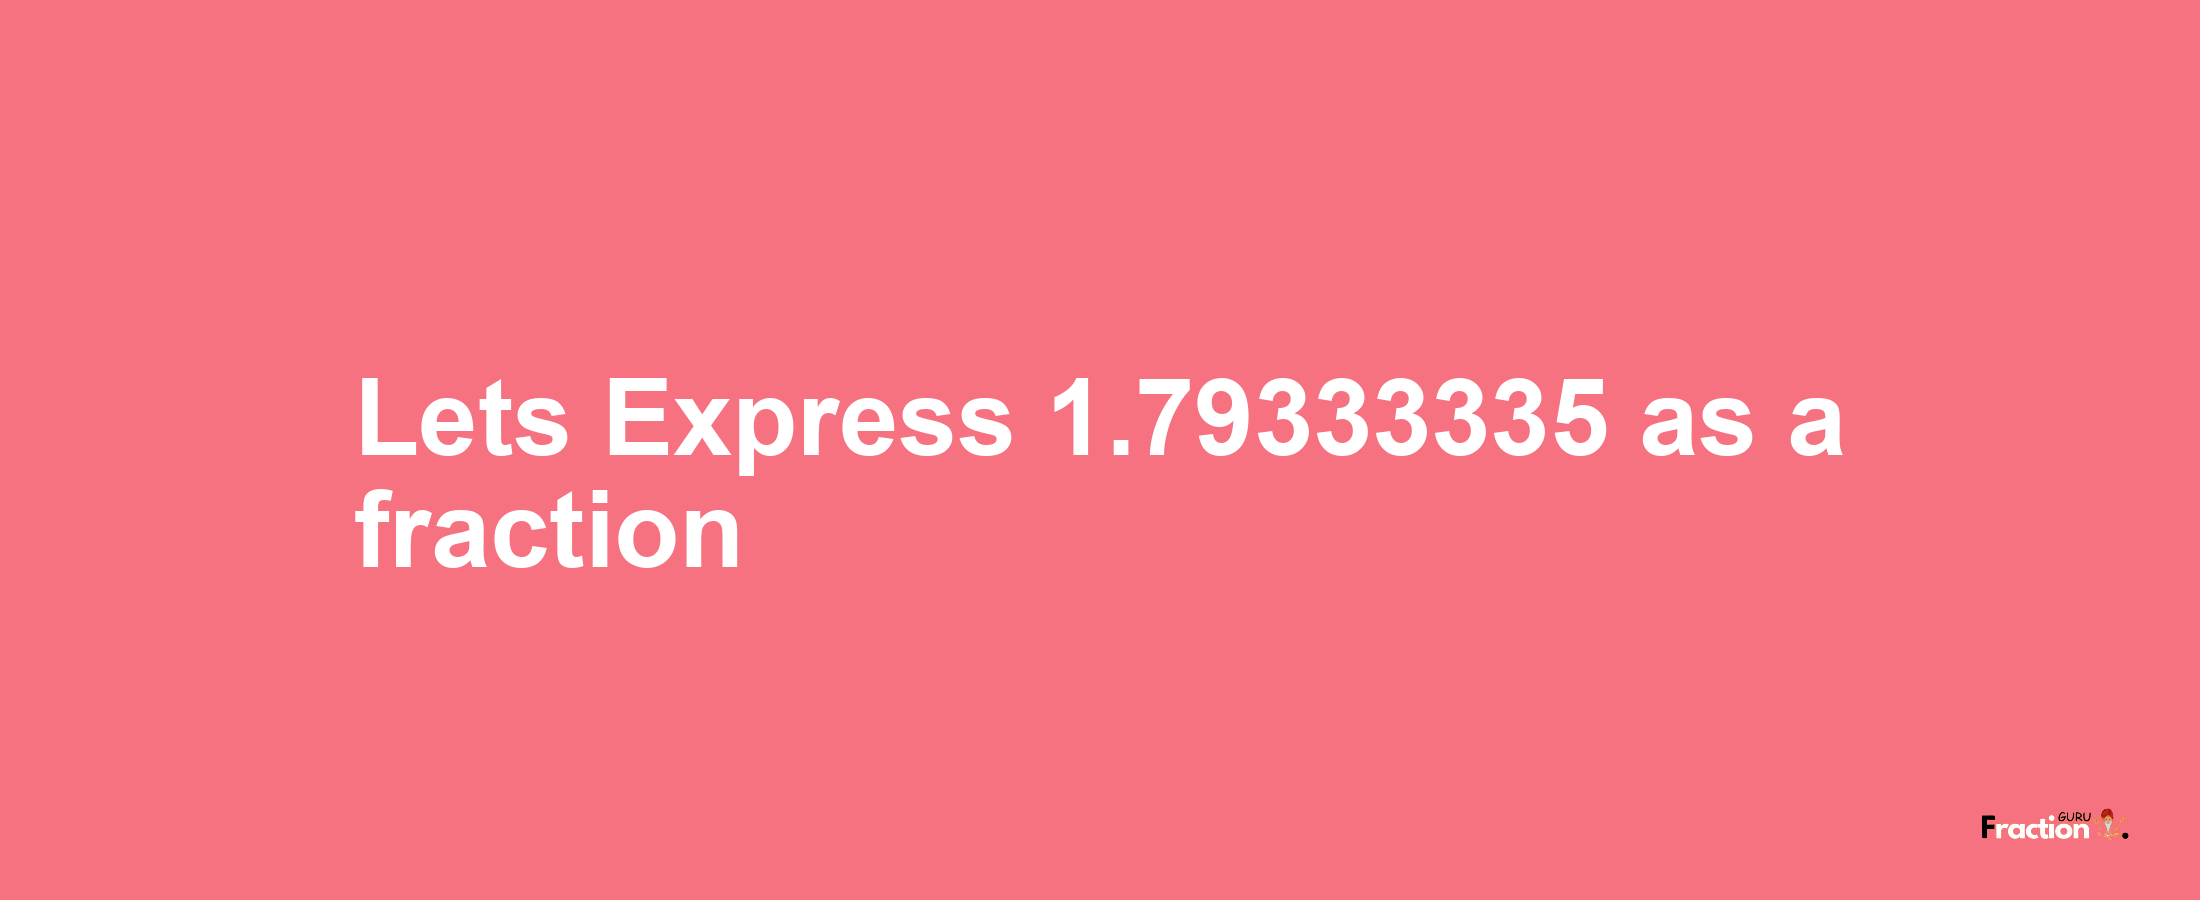 Lets Express 1.79333335 as afraction